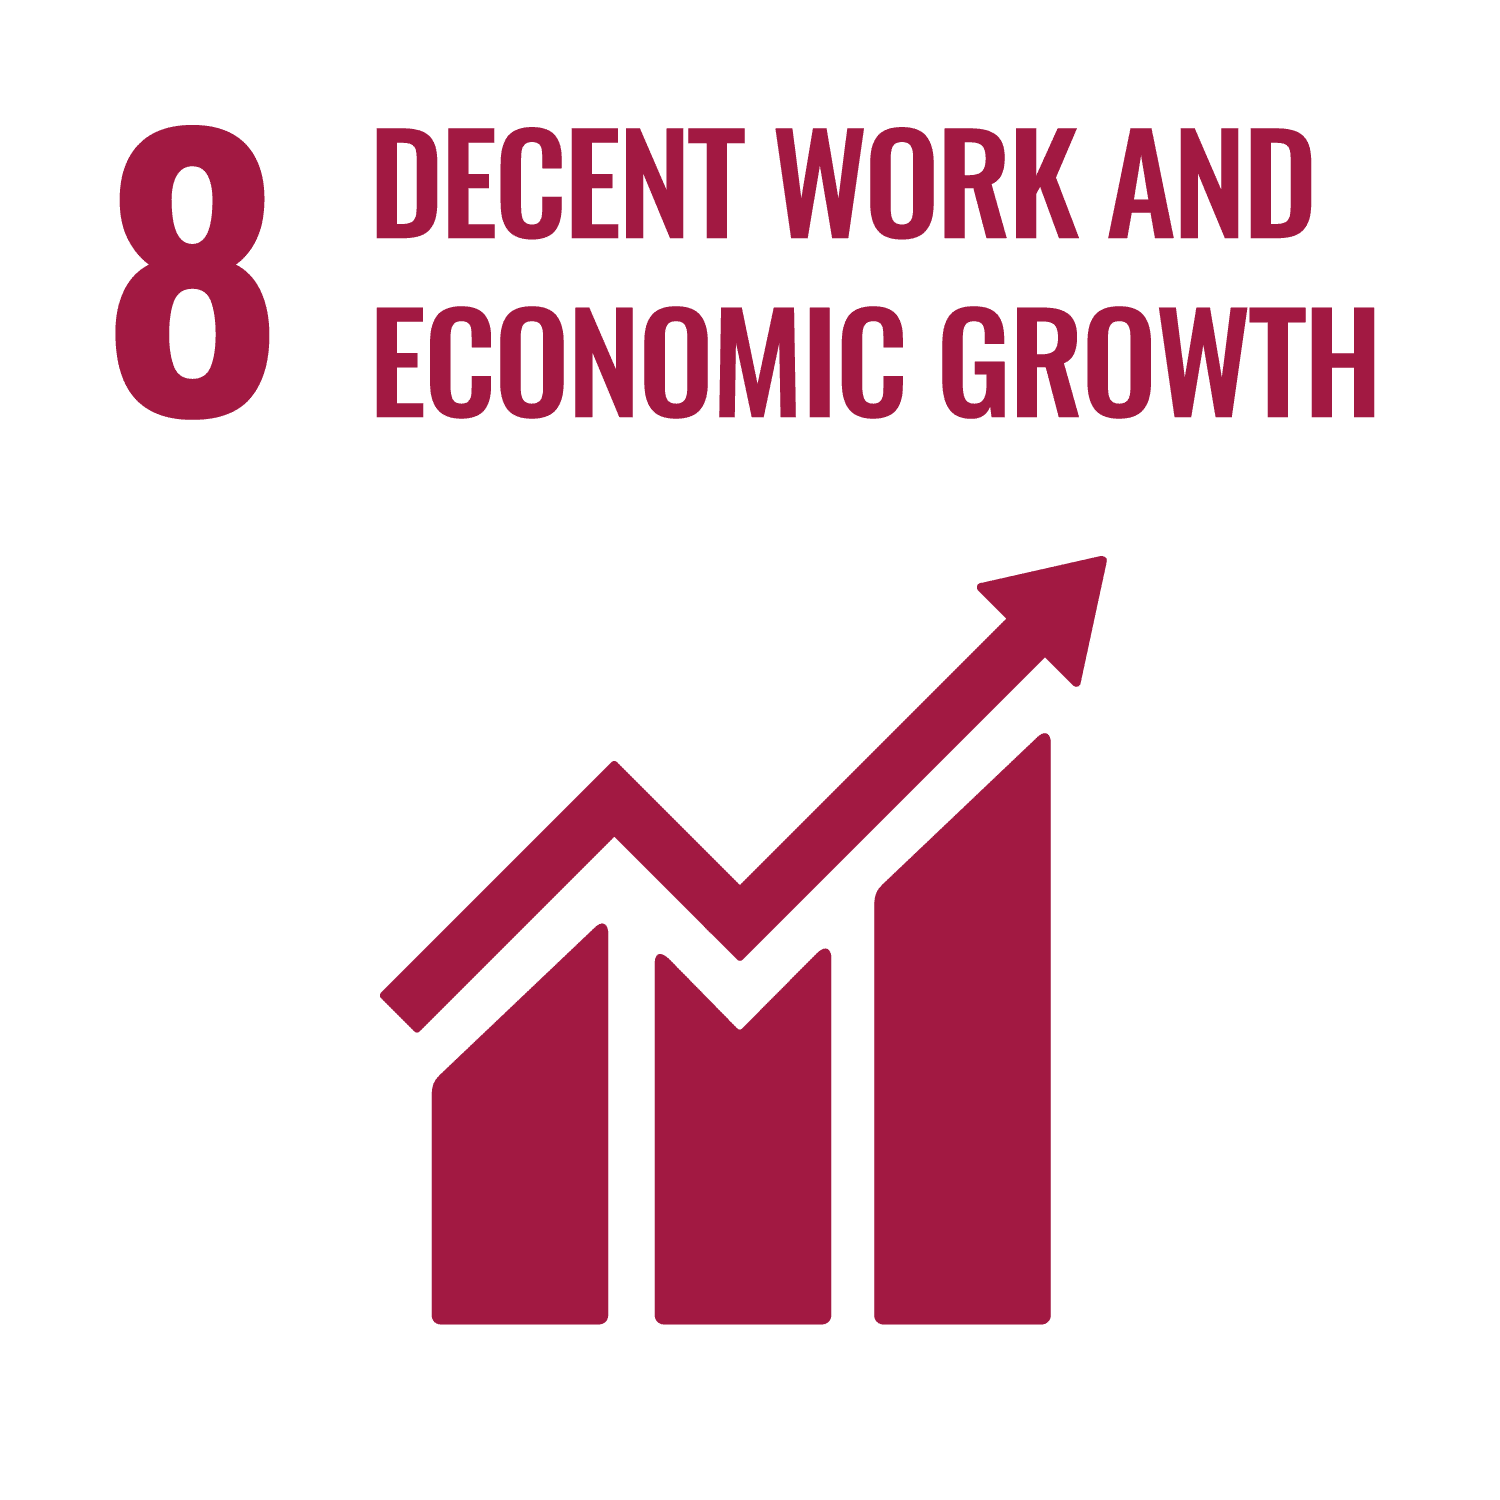 Sustainability - United Nations Sustainable Development Goal decent-work-and-economic-growth